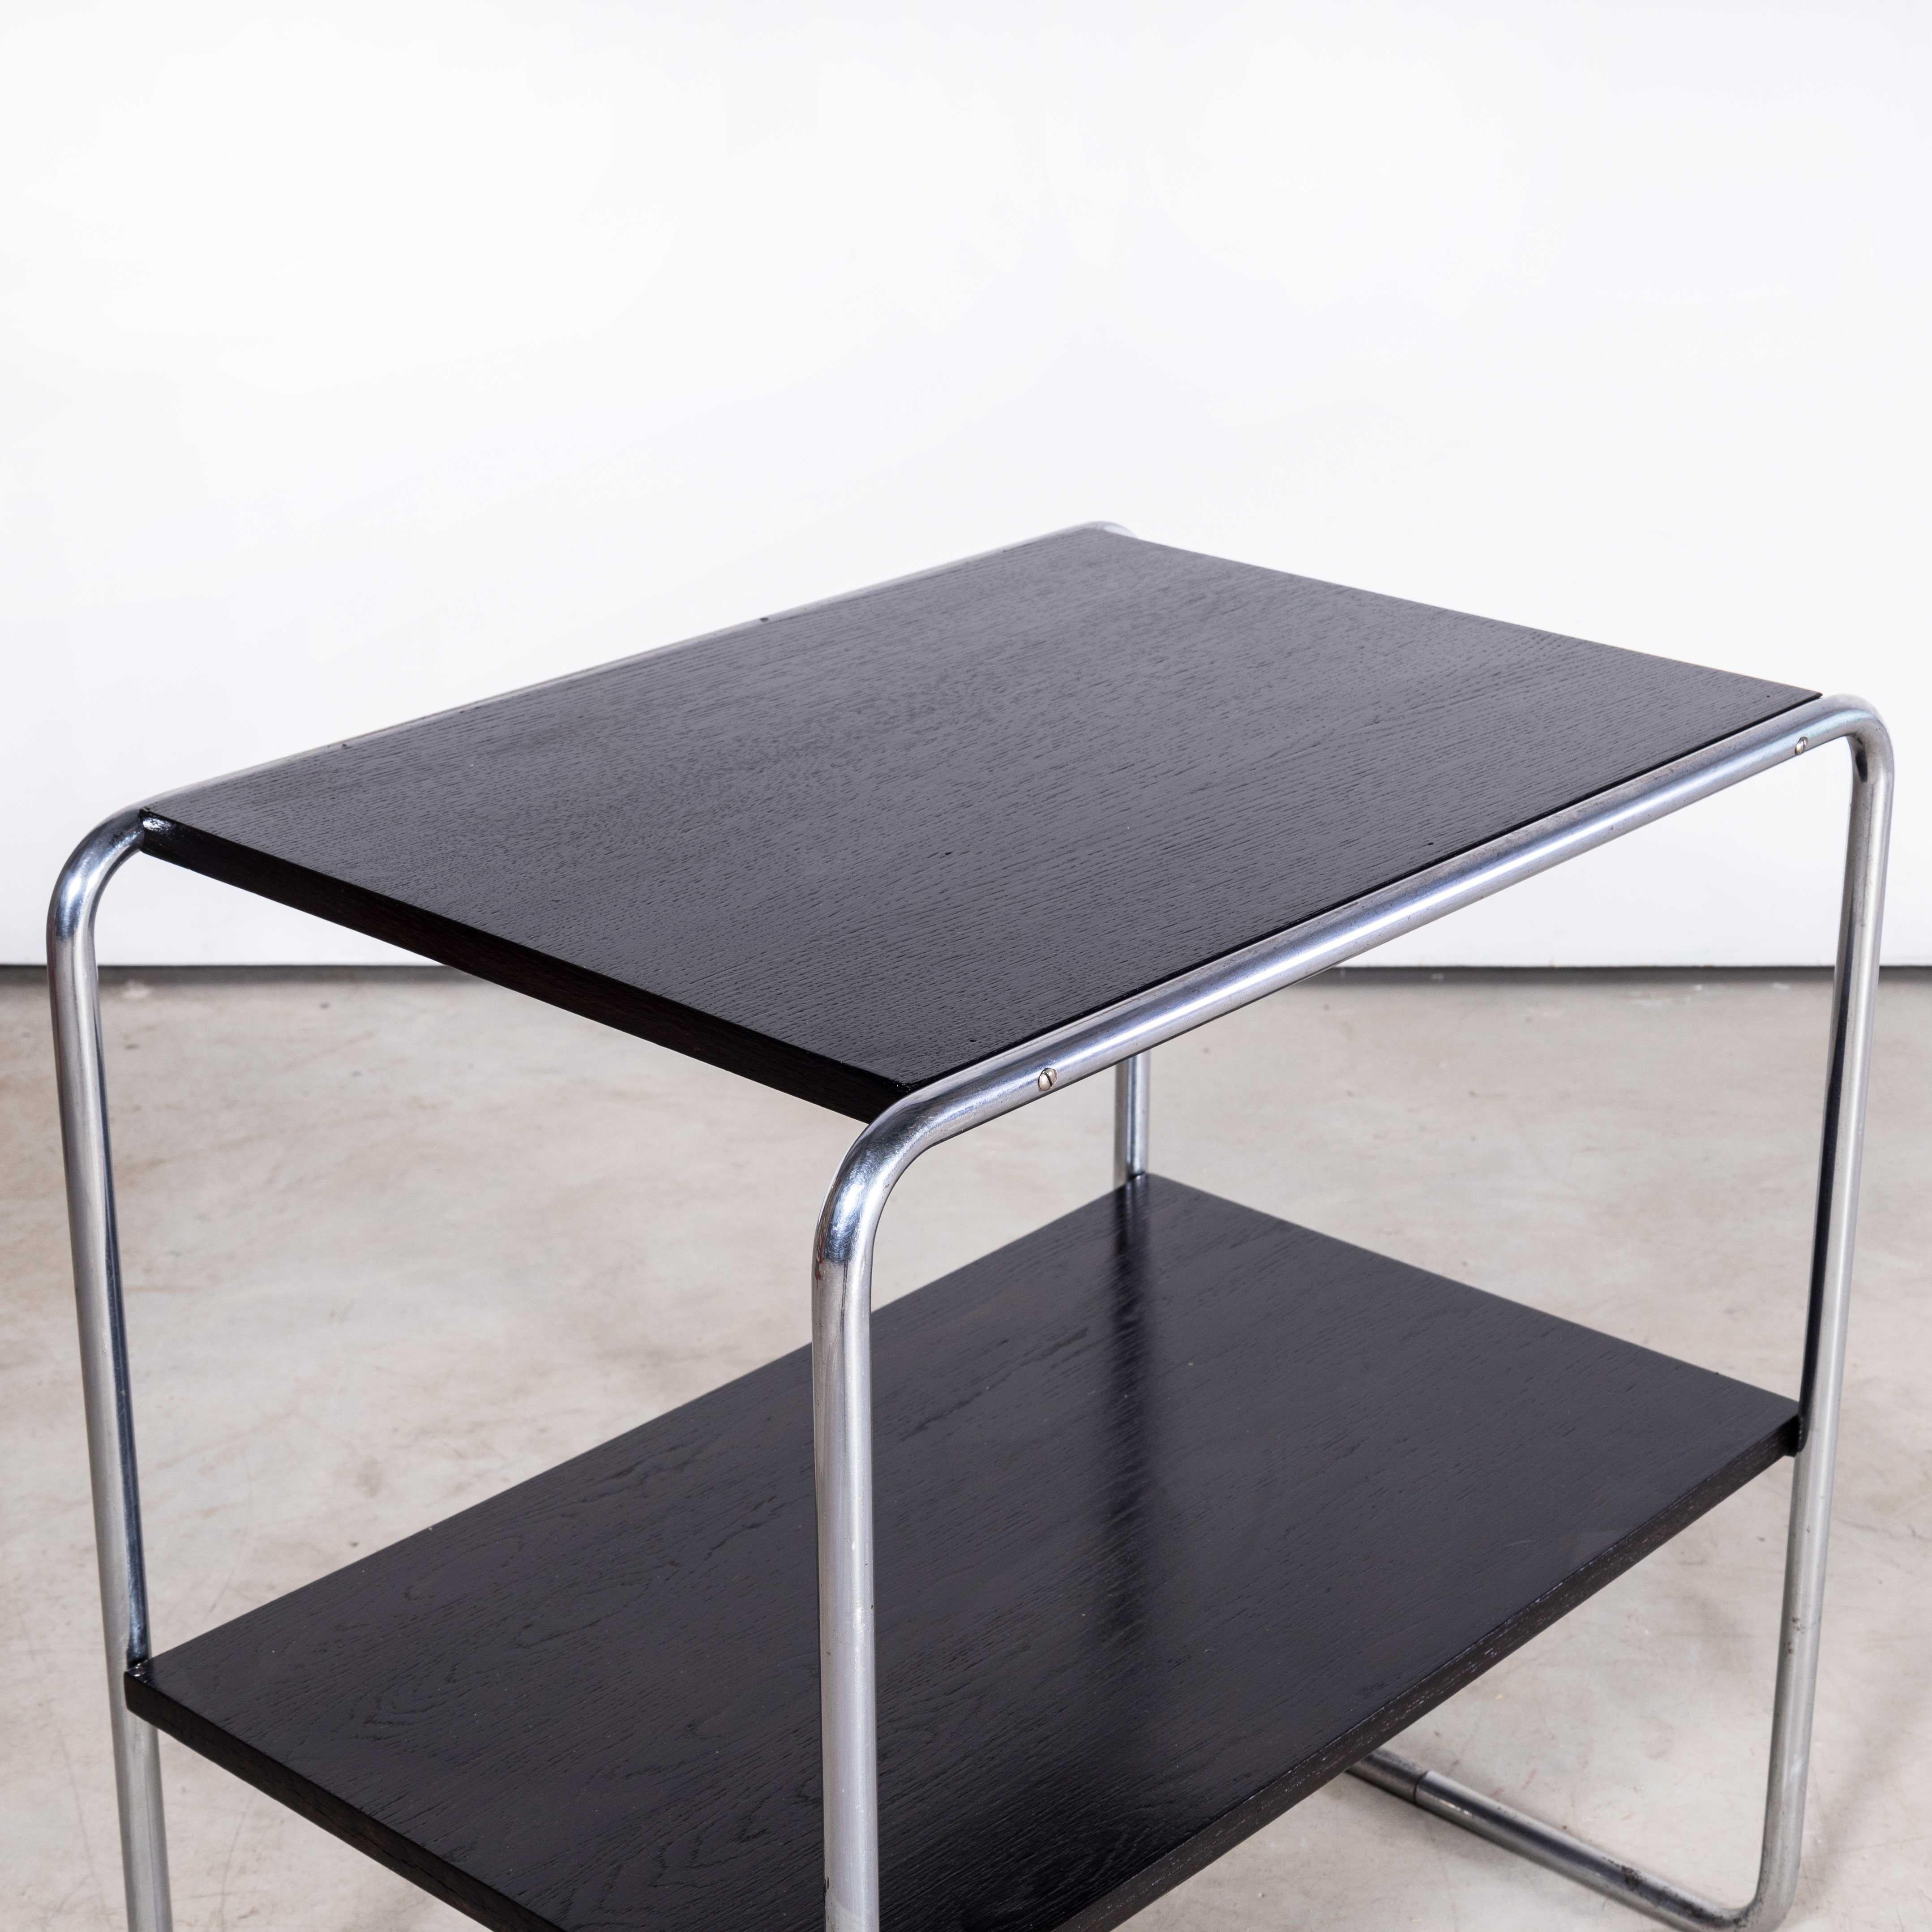 1960s Chrome Two Tier Side – Occasional Table
1960s Chrome Two Tier Side – Occasional Table. Beautiful simple and Classic midcentury side table sourced in the Czech Republic. Czech design will always be affiliated to the Bauhaus movement which